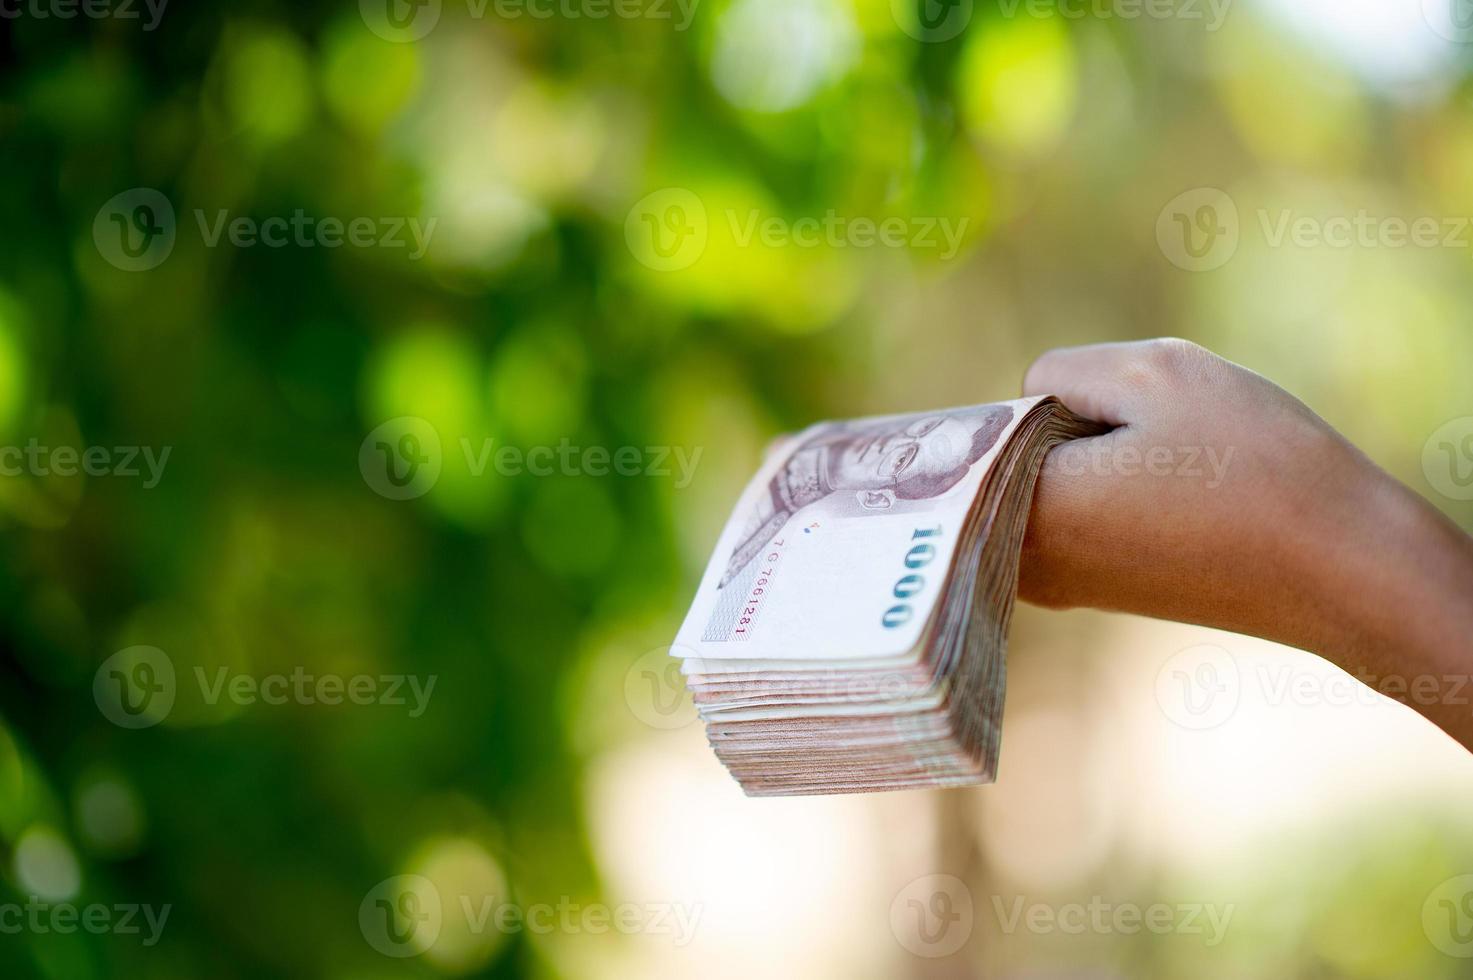 Close-up photos and bank cards used for business and currency exchange purchases. Hand and money concept